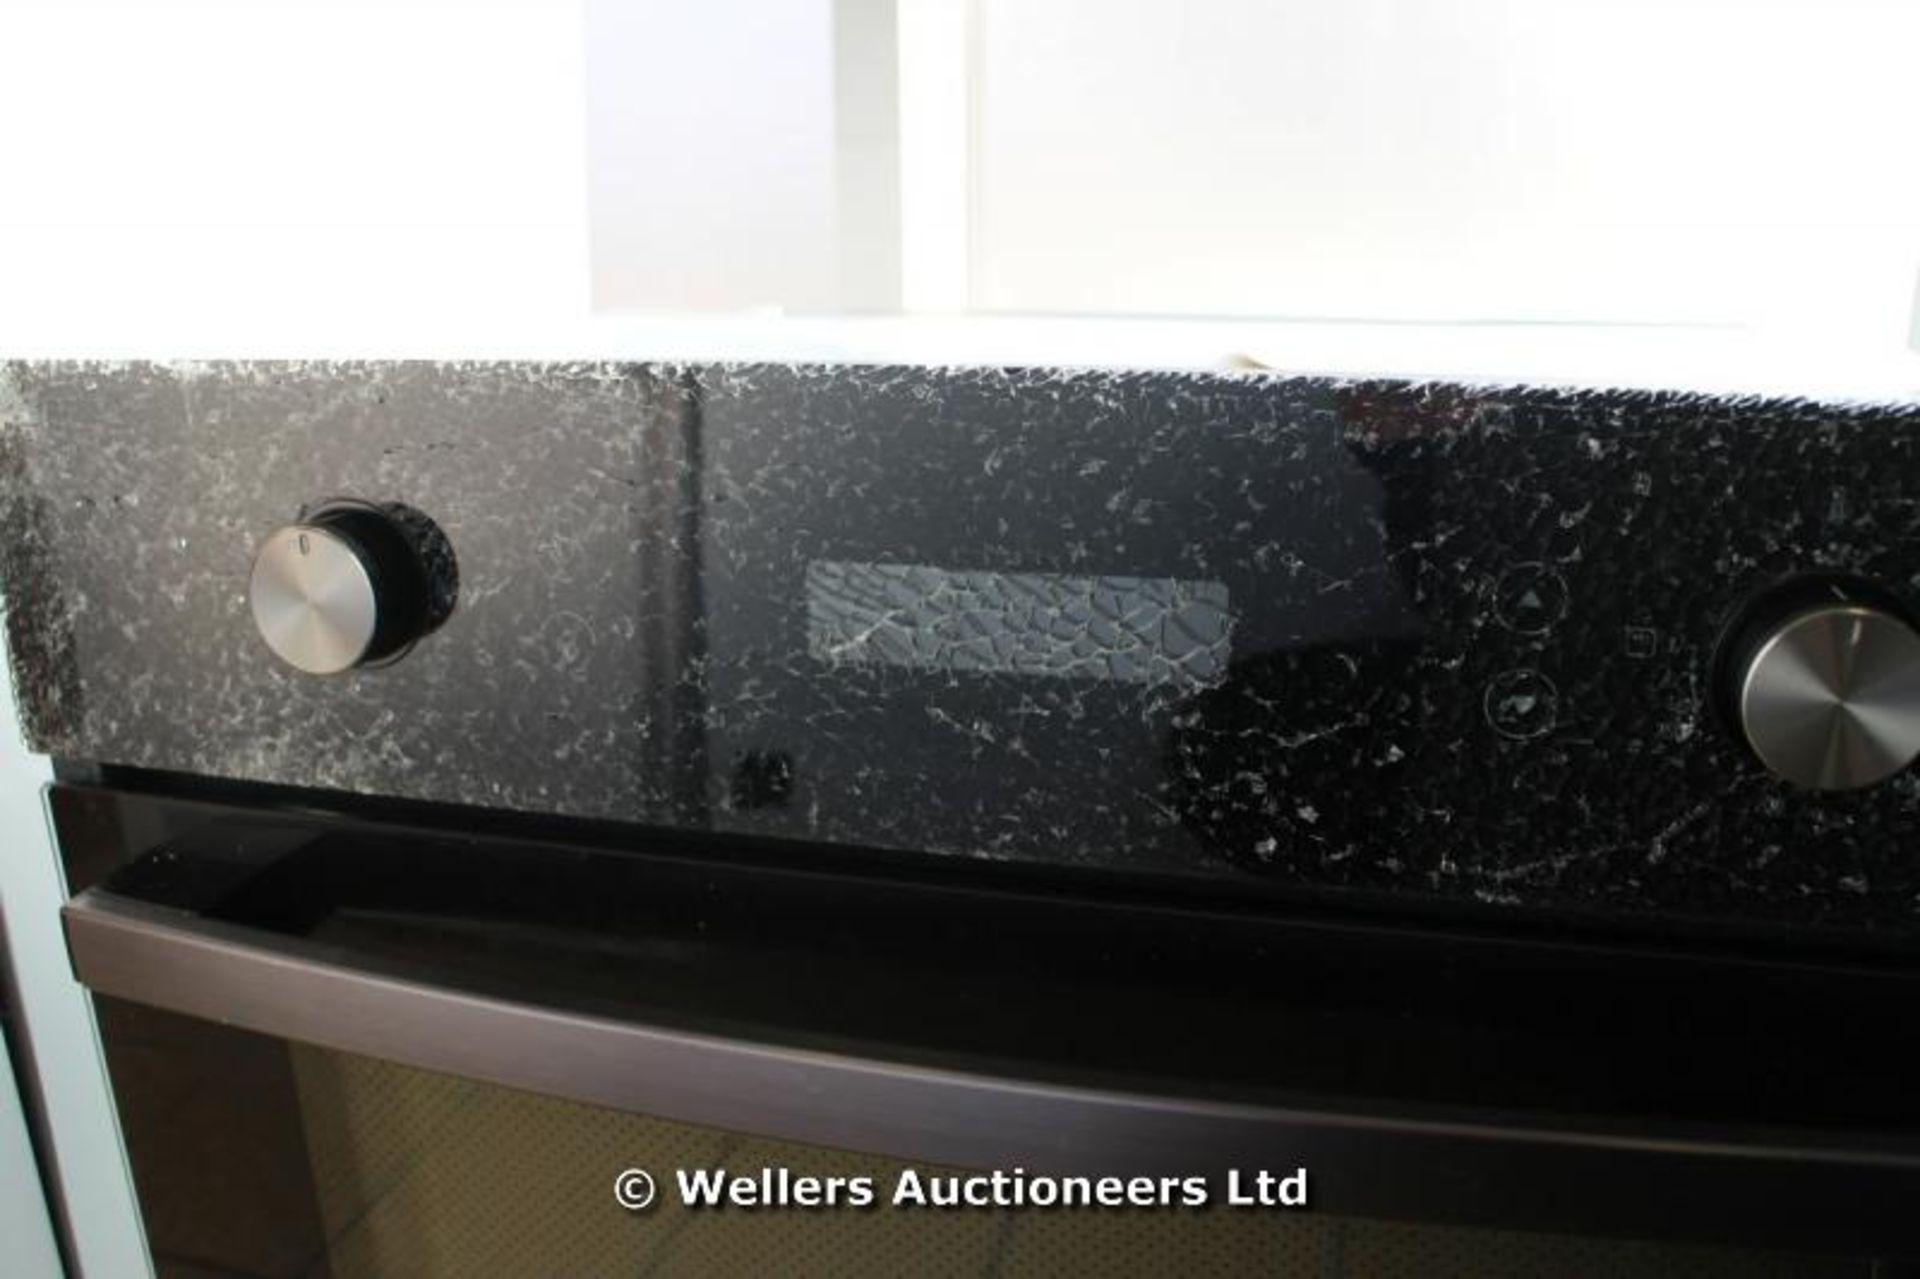 *SAMSUNG BF1N6G123 BLACK GLOSS ELECTRIC OVEN THE PIECE OF GLASS WHERE THE DIALS ARE IS SMASHED AND